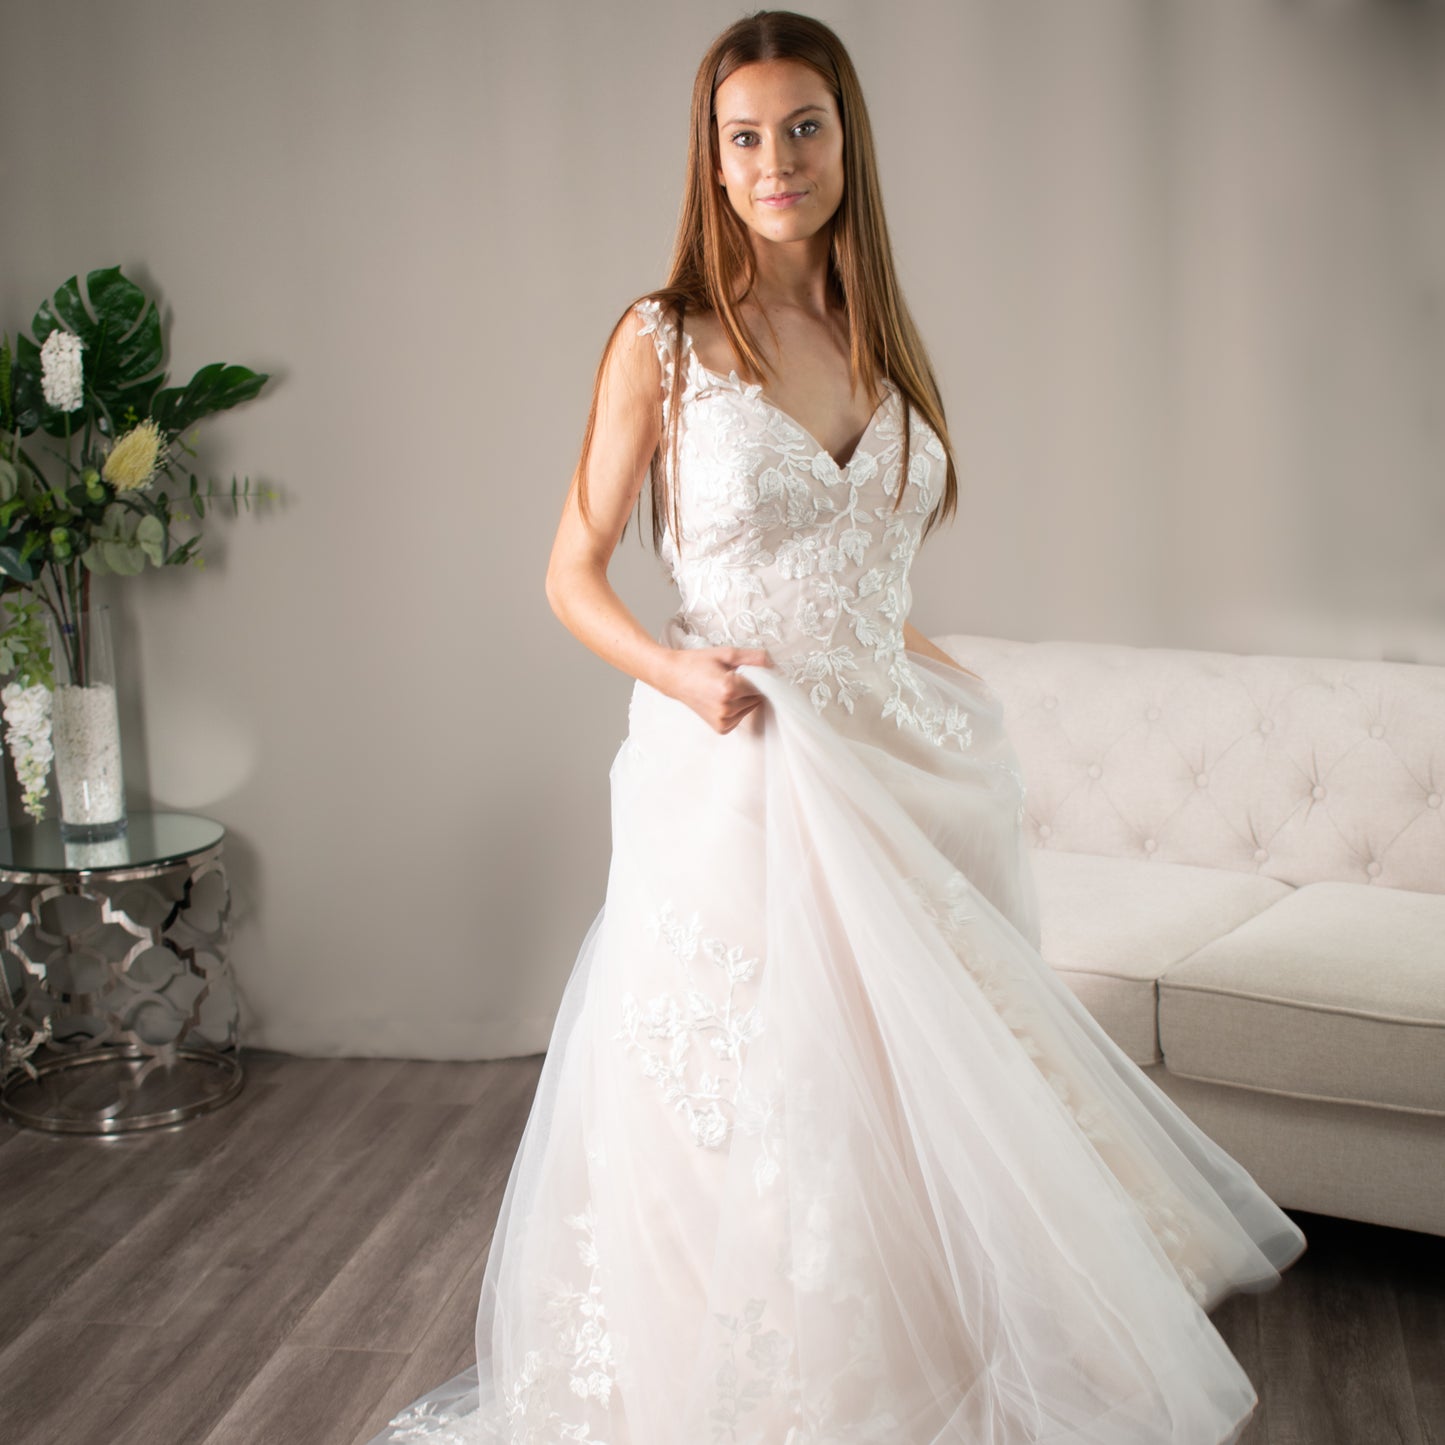 Paulette Lace Wedding Dress displayed in a beautiful setting